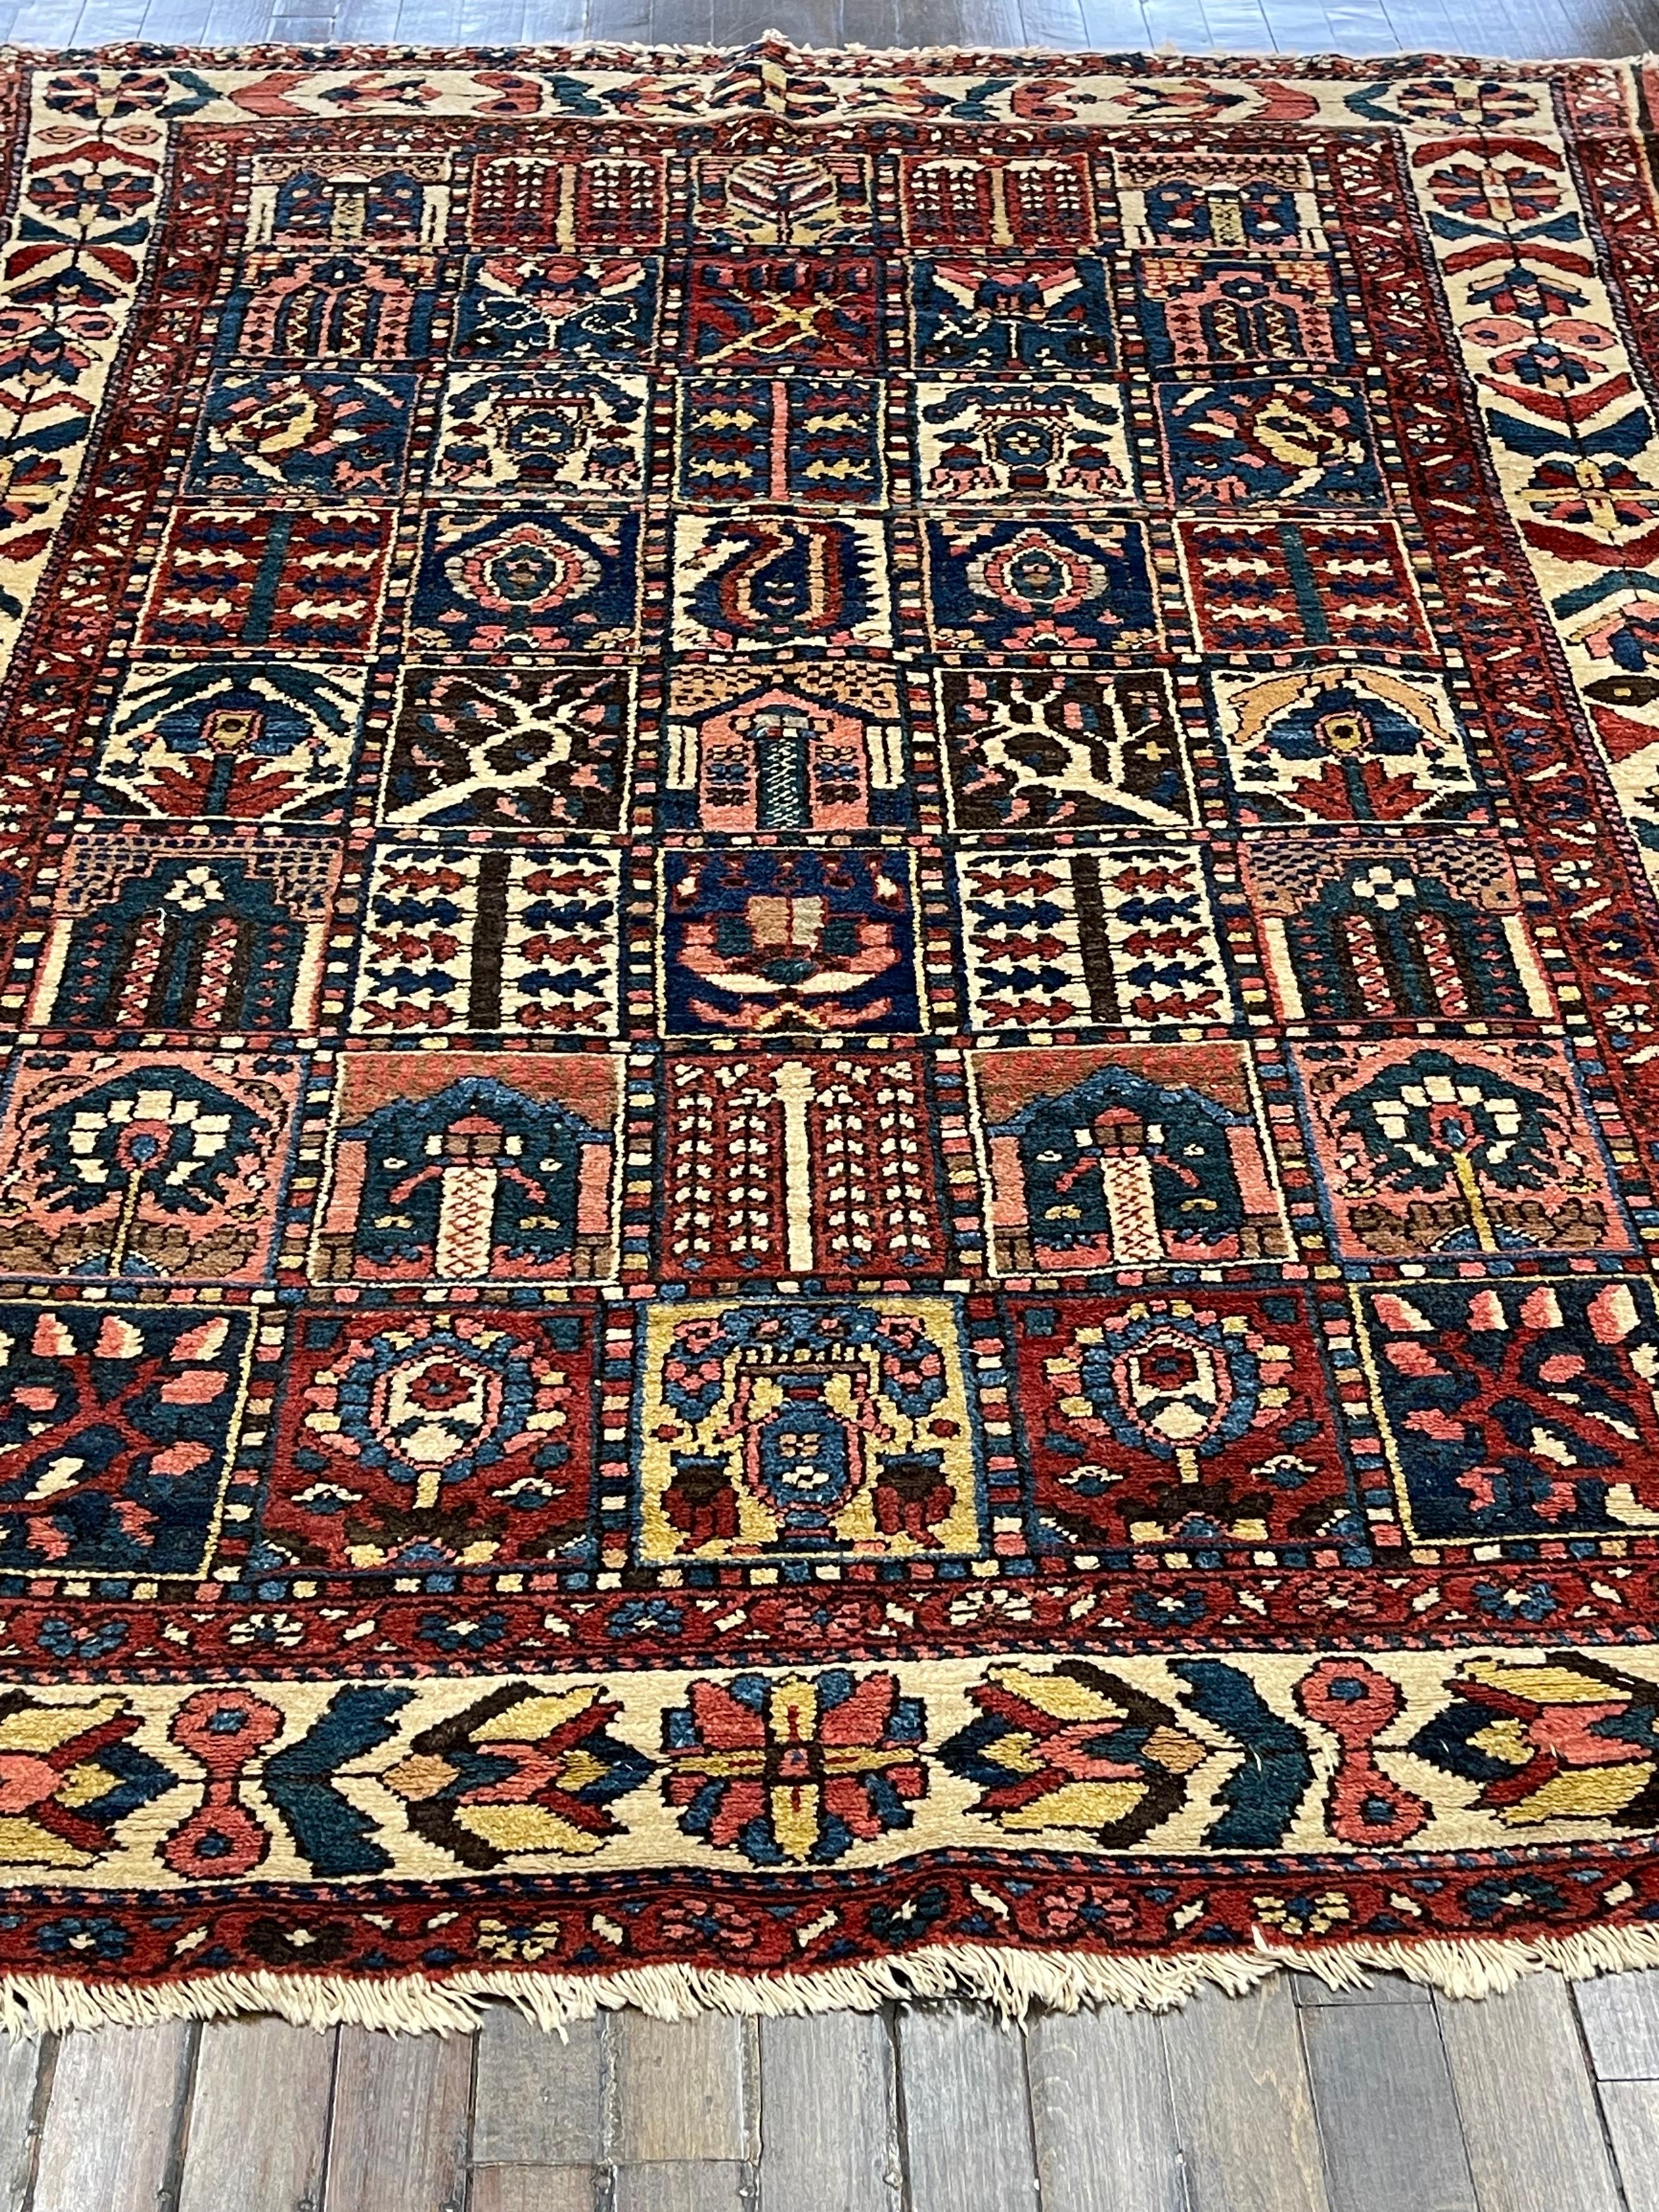 This carpet is handwoven in region Chahar Mahal where the Bakhtiari tribe settled in west central Iran. The field design of compartmentalized tree and flower is the signature pattern of Bakhtiari rugs. The freedom of design overall and the stunning